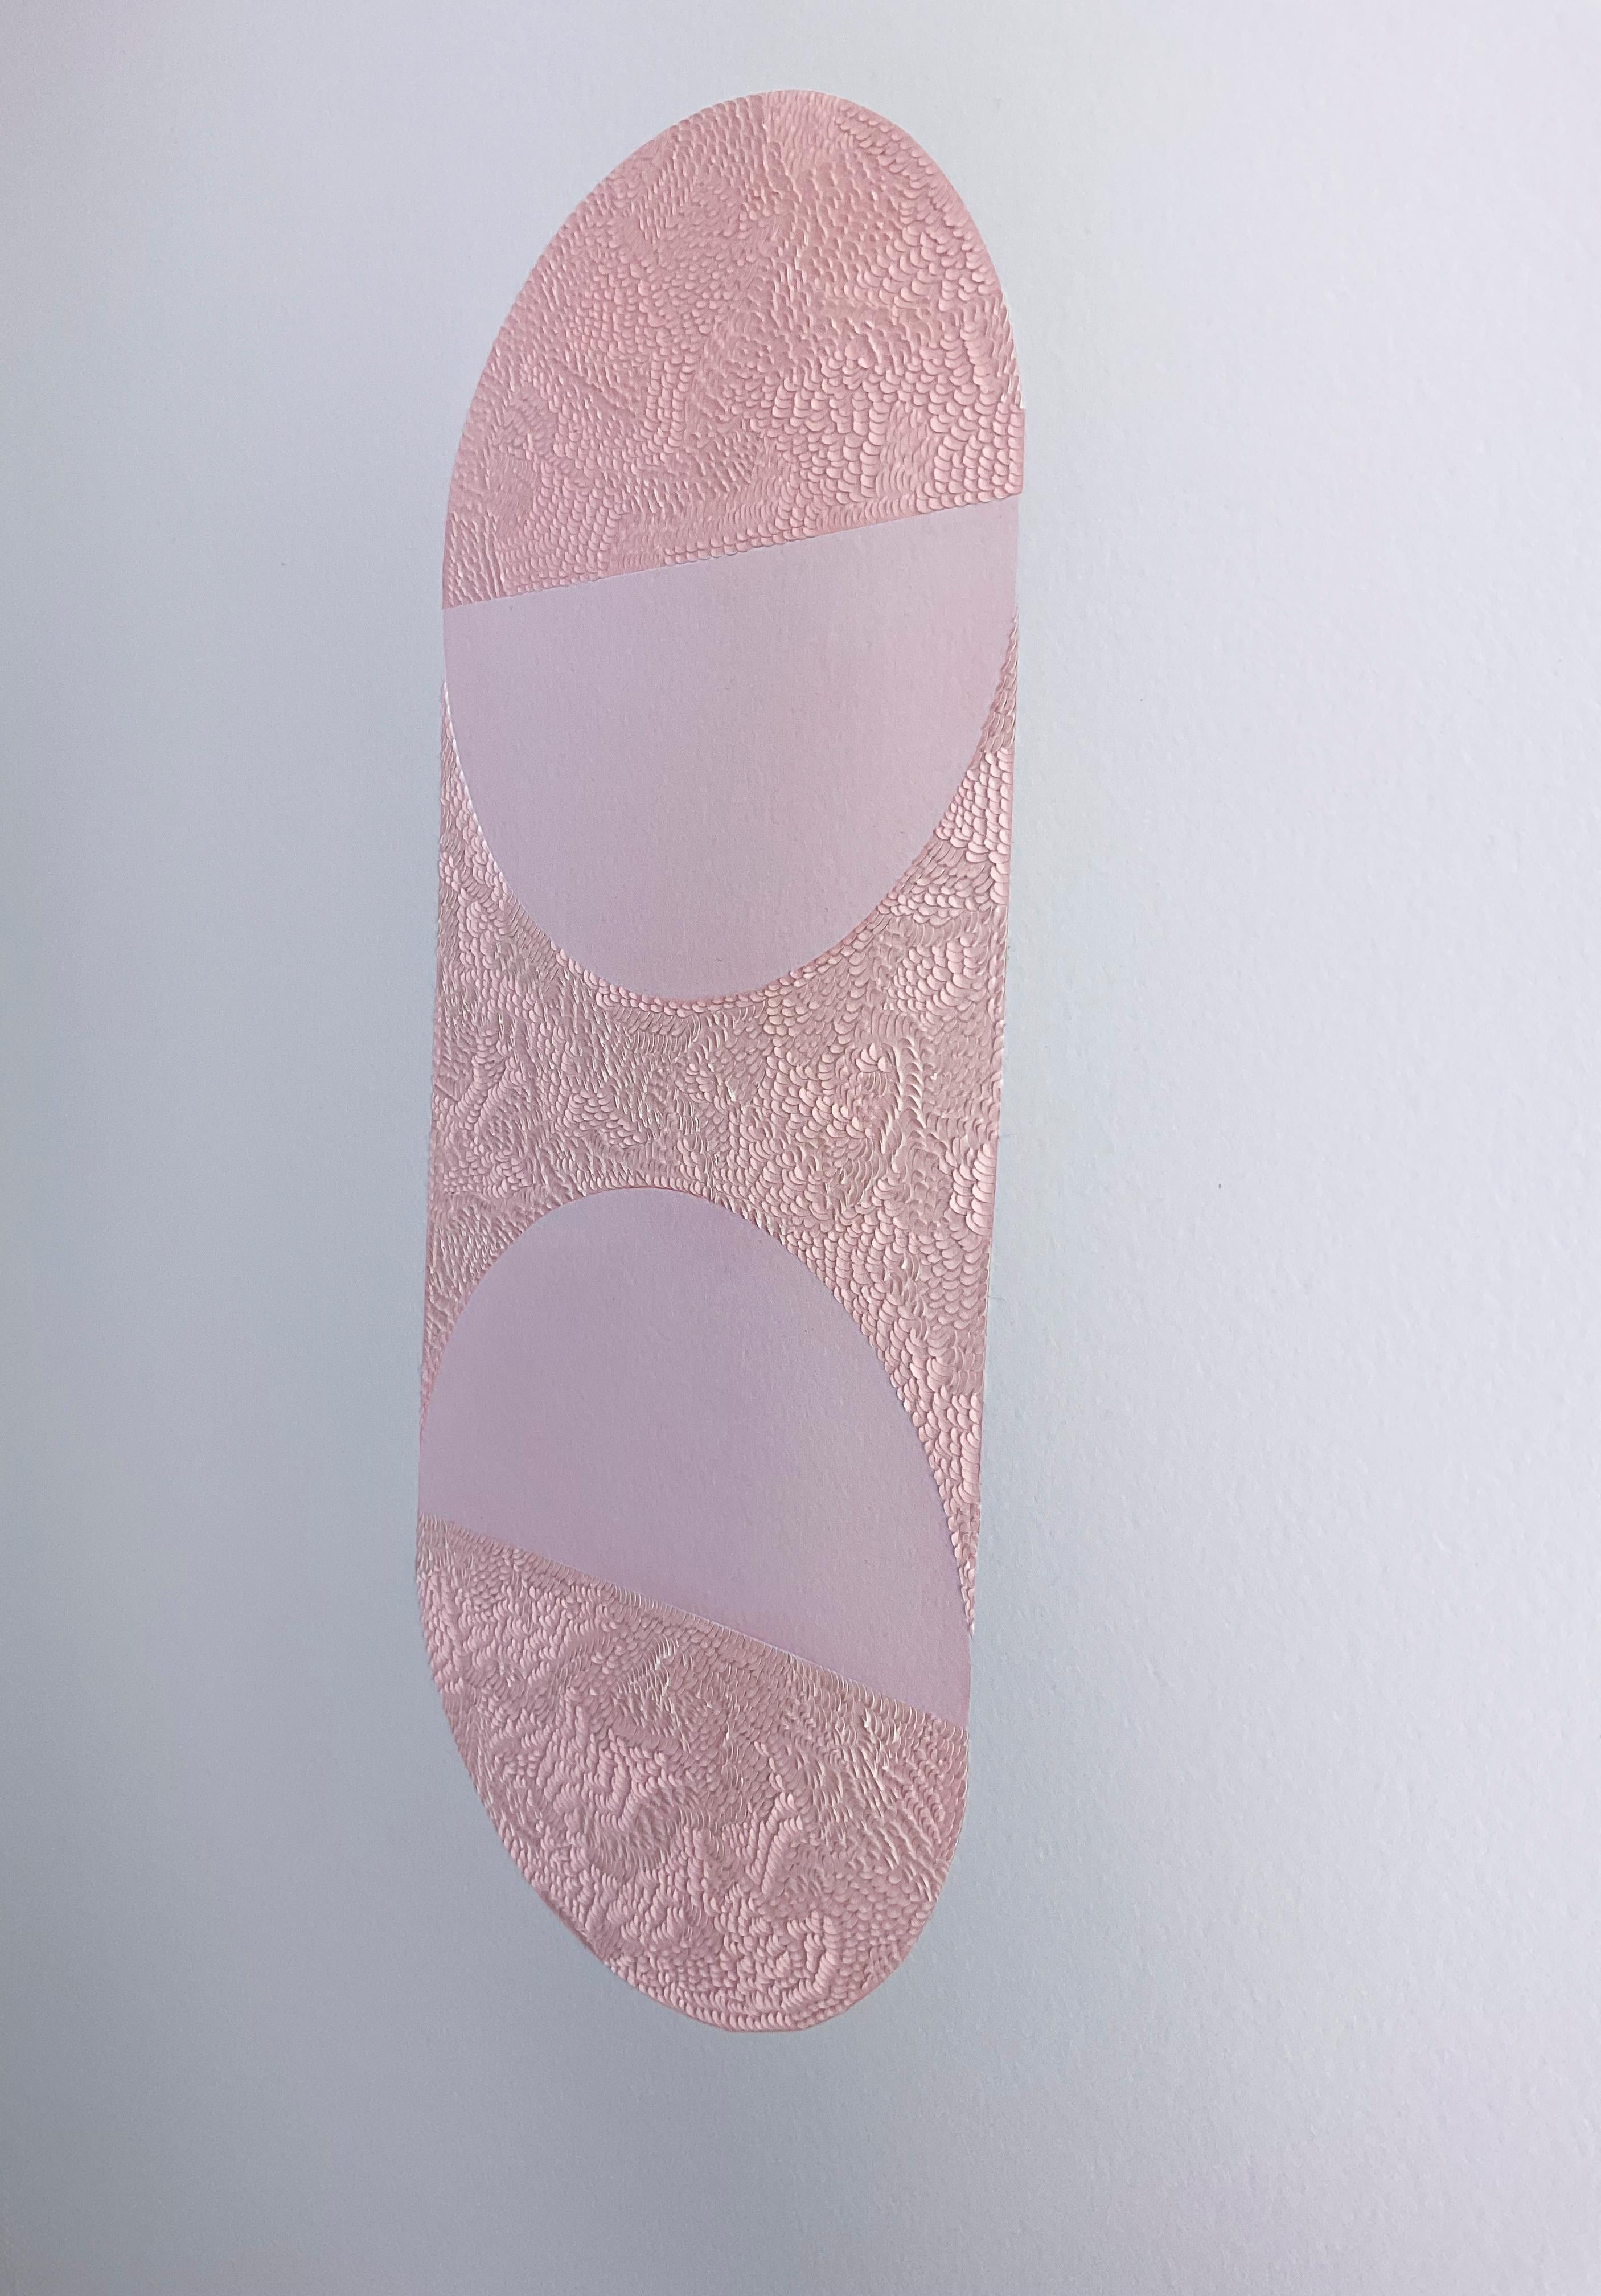 Knife Drawing XXIV - Manipulated Textured Paper with Stunning Detail (Pink) - Contemporary Art by Lucha Rodriguez